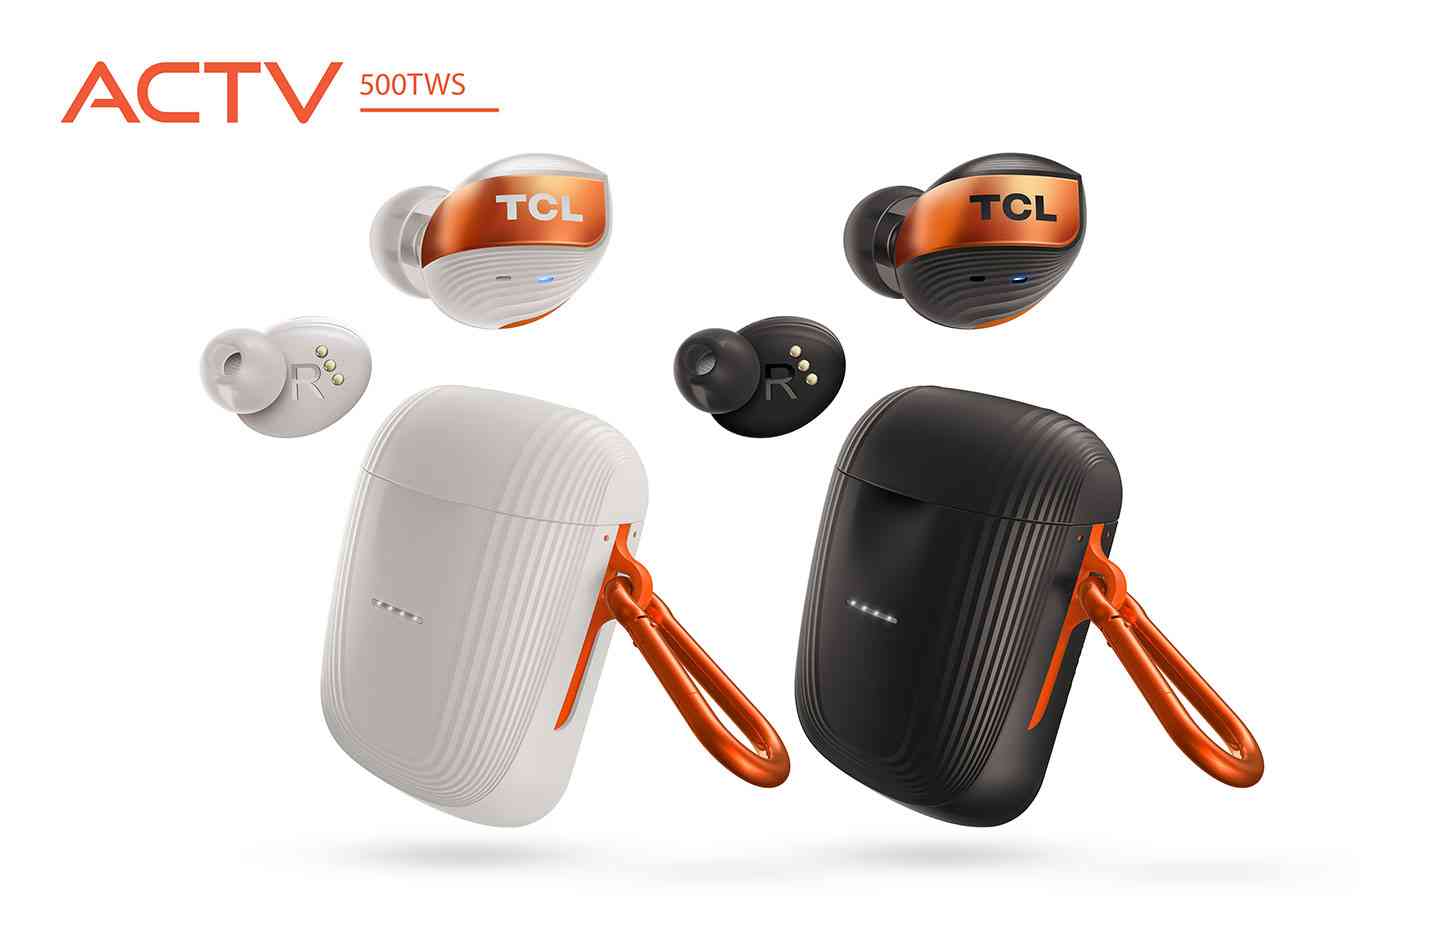 TCL ACTV500TWS wireless earbuds